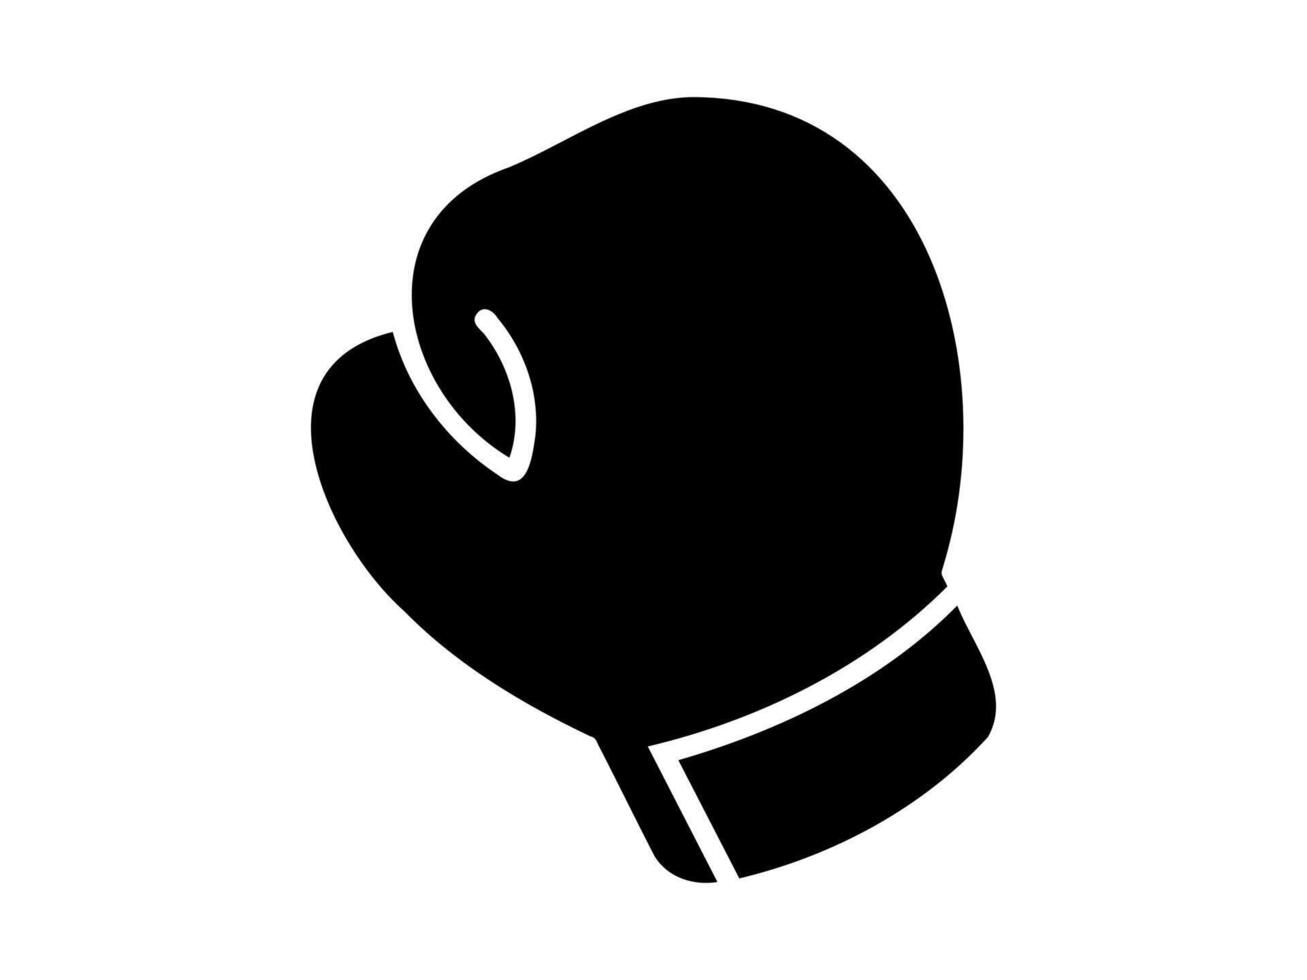 Black boxing glove silhouette. Black and white graphic illustration of sporting glove. Icon, logo, sign, pictogram, print. Concept of sports equipment, powerful punch. Isolated on white background. vector